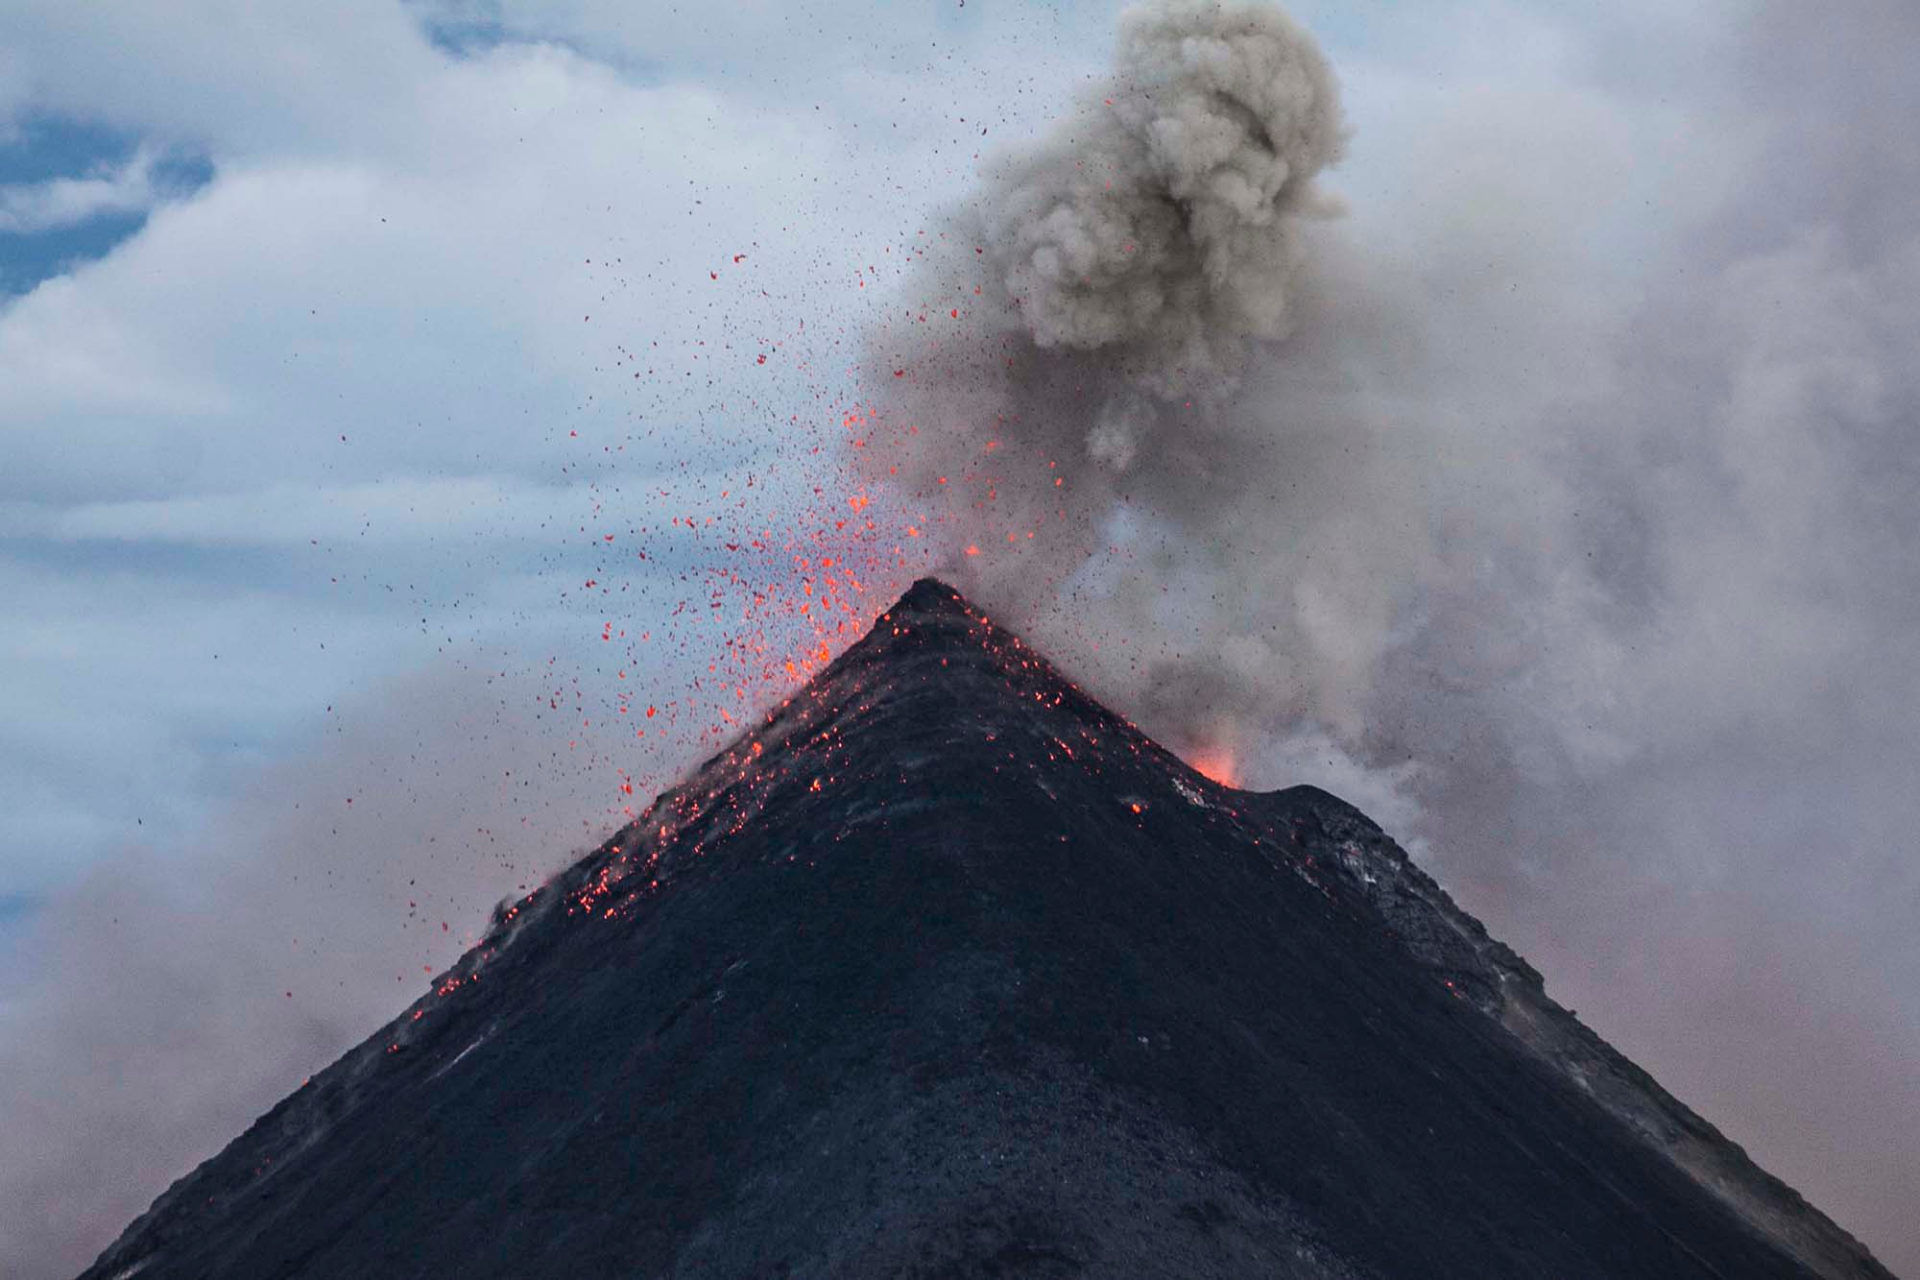 Volcano in the process of erupting